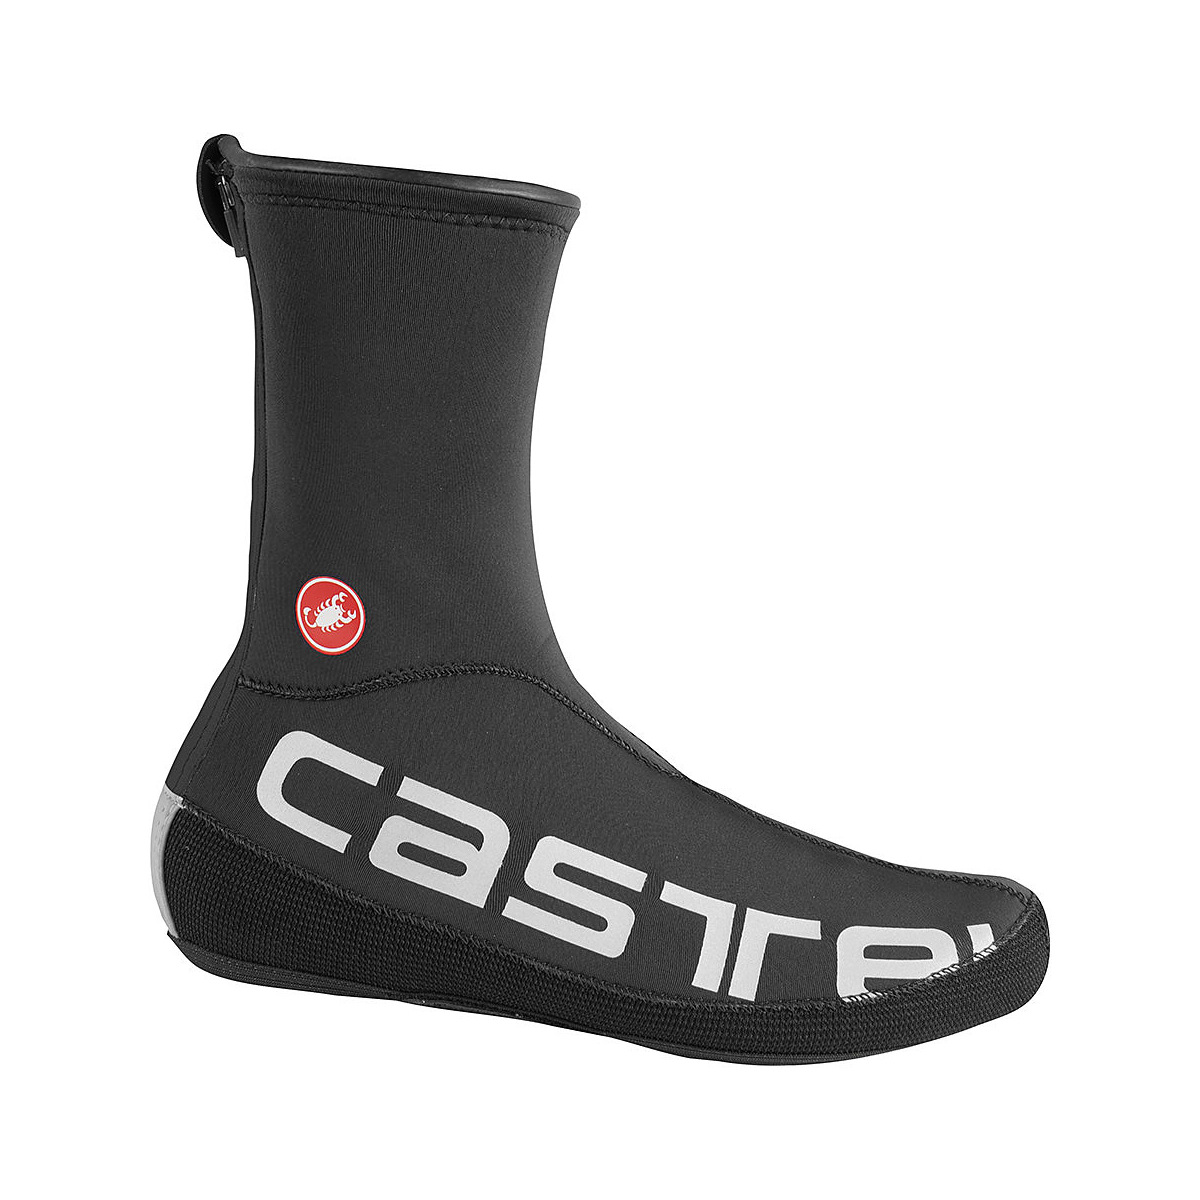 COUVRE-CHAUSSURES CASTELLI DILUVIO UI